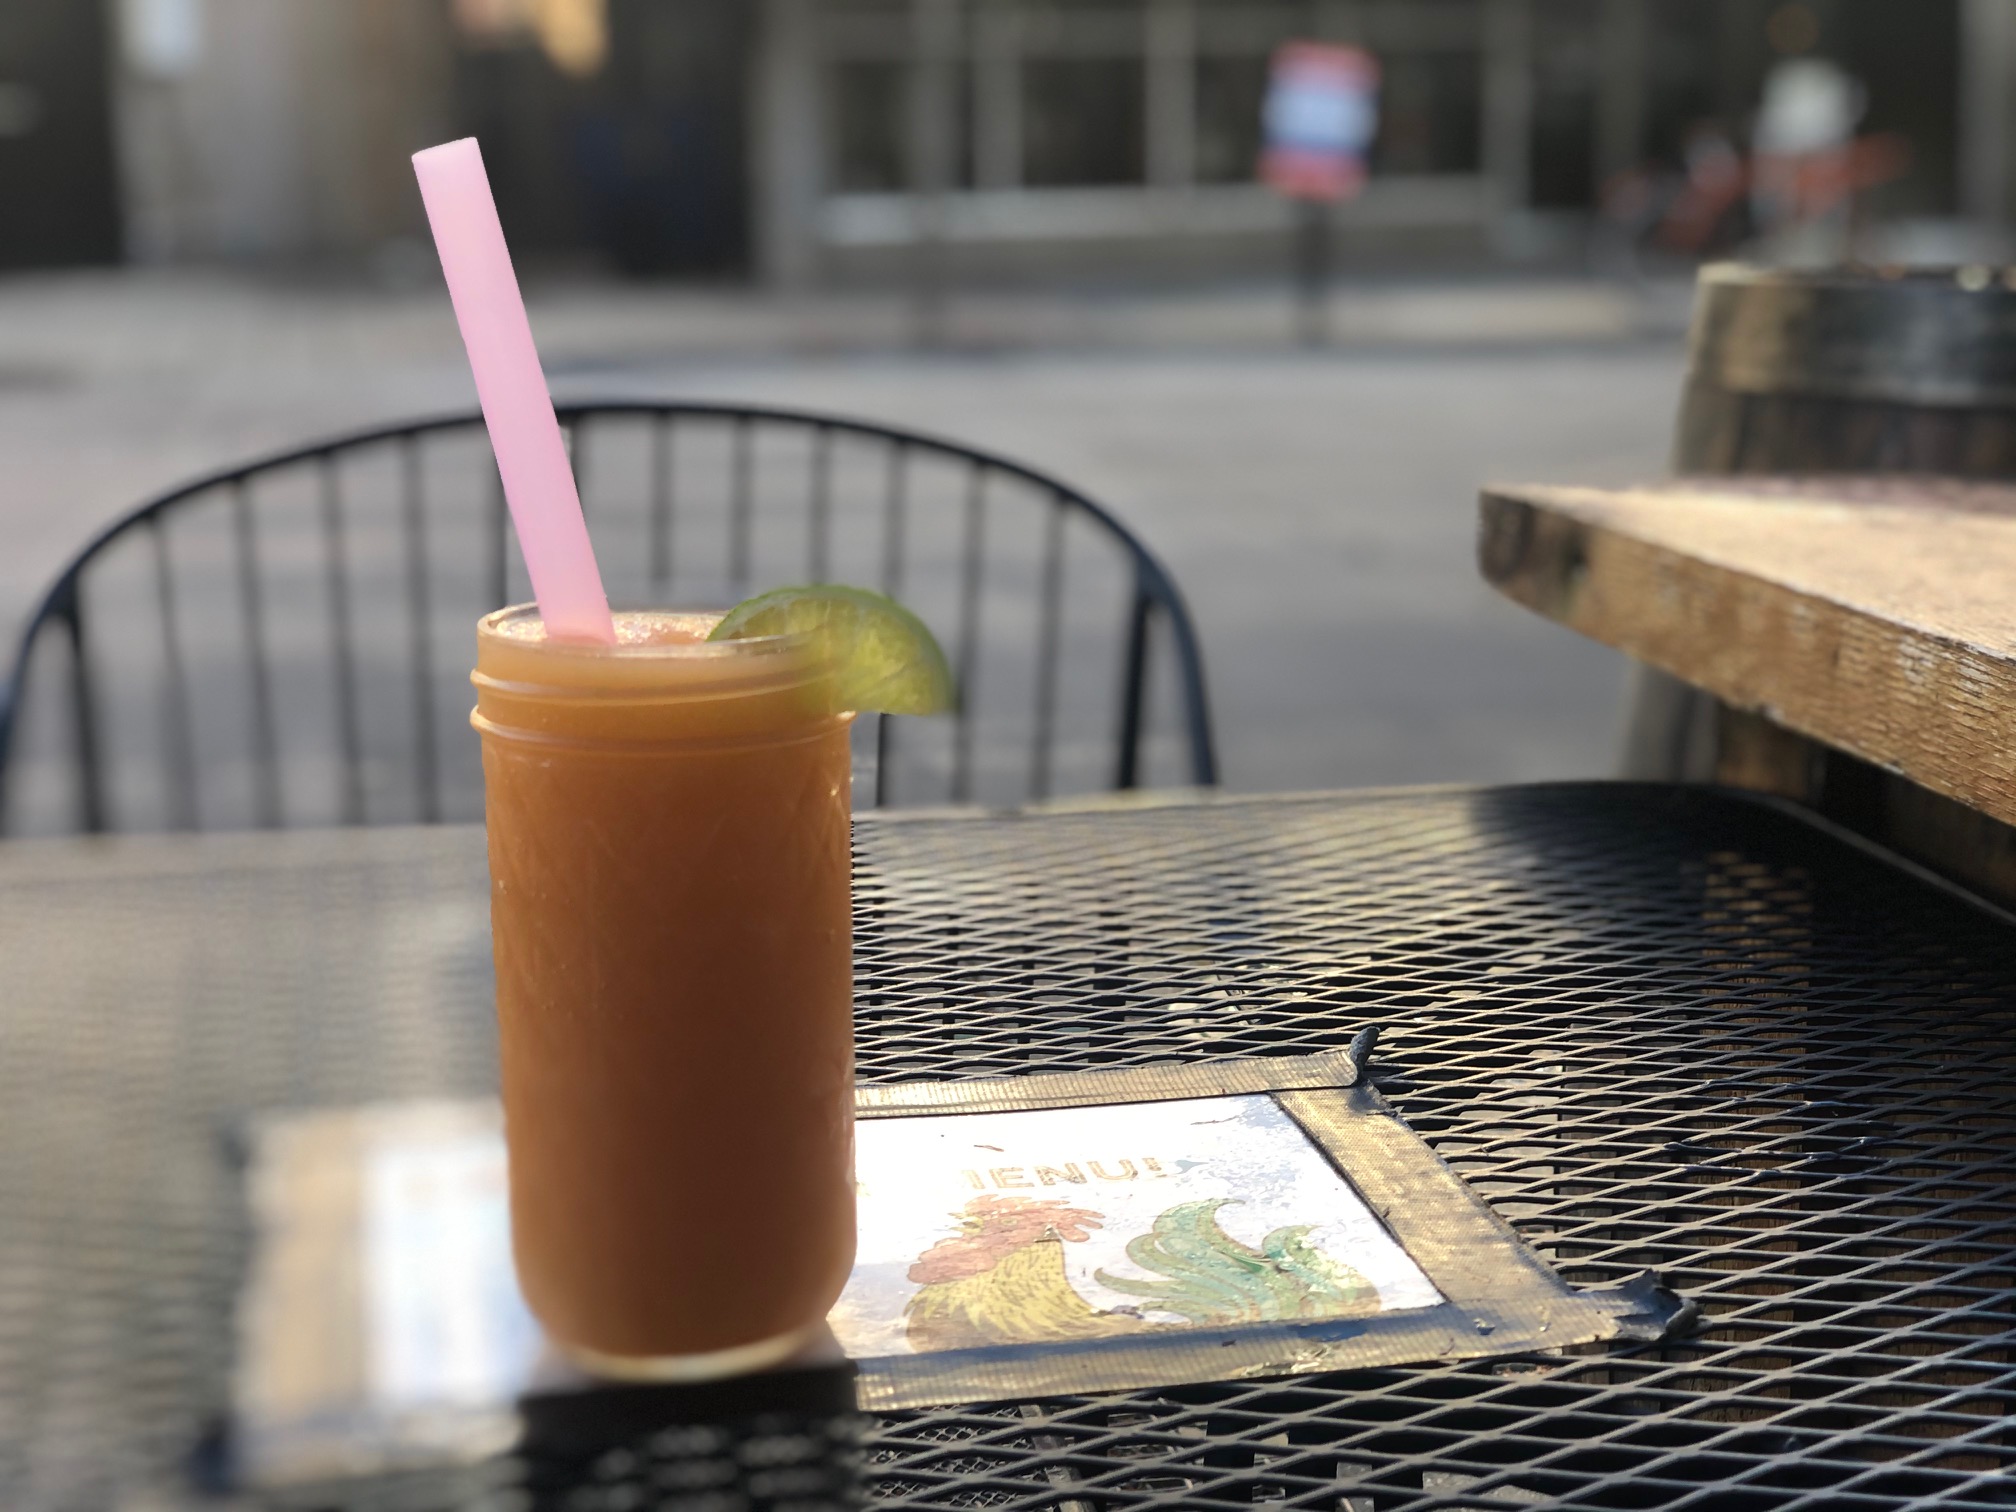 On a black outdoor table with a tape white piece of paper with a rooster, there is a mason jar filled with Watson's orange Protect Ya Nectar slush. Photo by Alyssa Buckley.